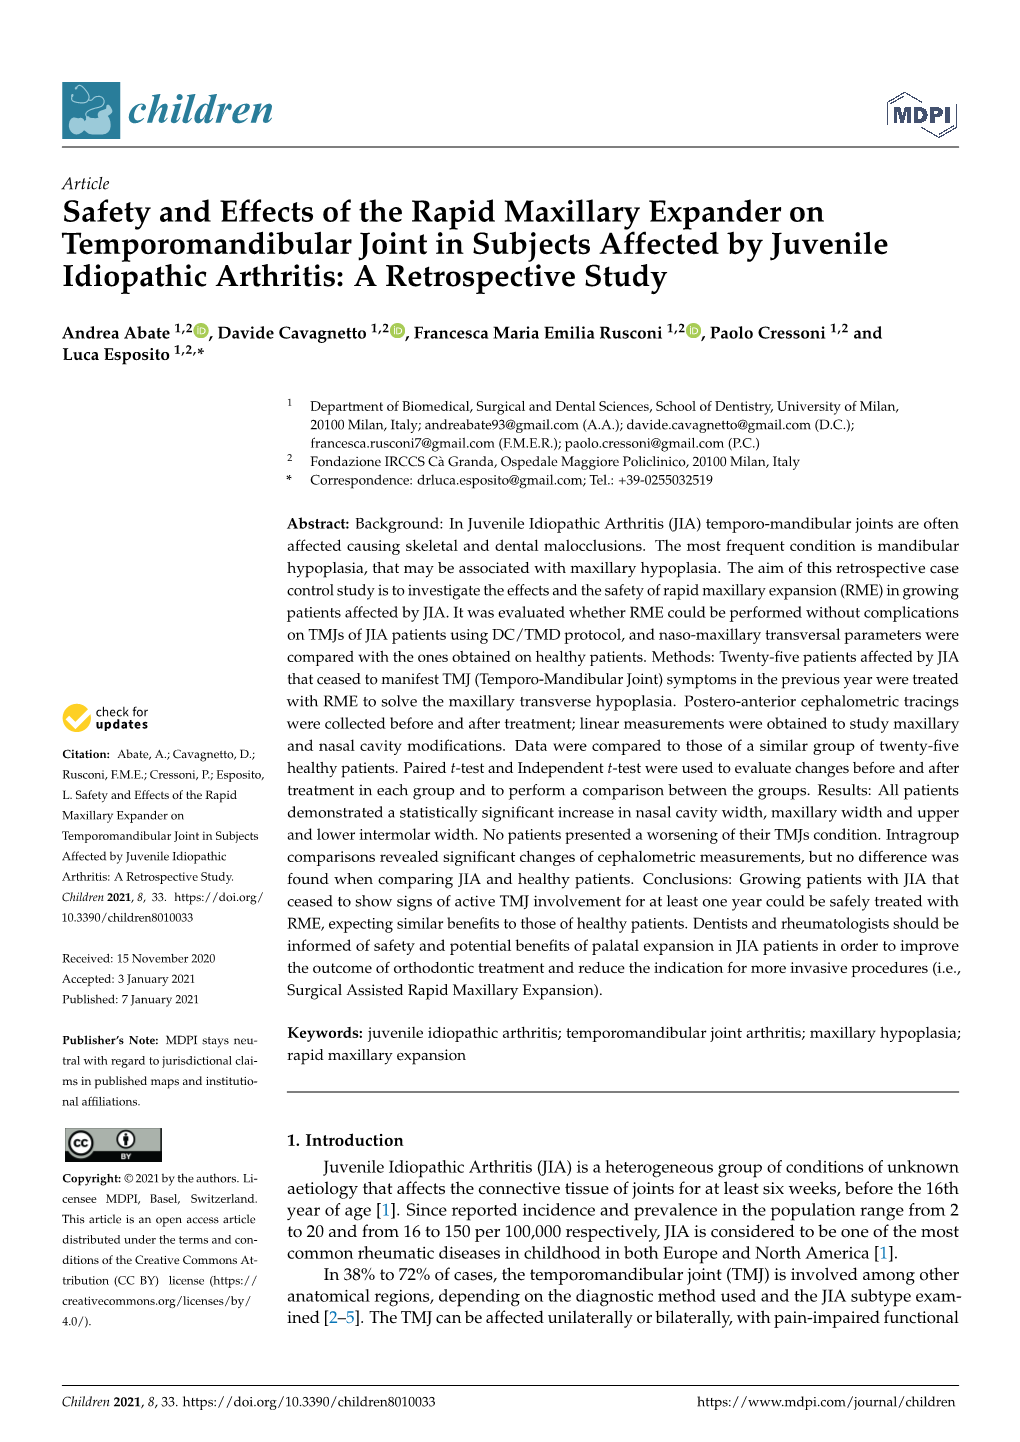 Safety and Effects of the Rapid Maxillary Expander on Temporomandibular Joint in Subjects Affected by Juvenile Idiopathic Arthritis: a Retrospective Study